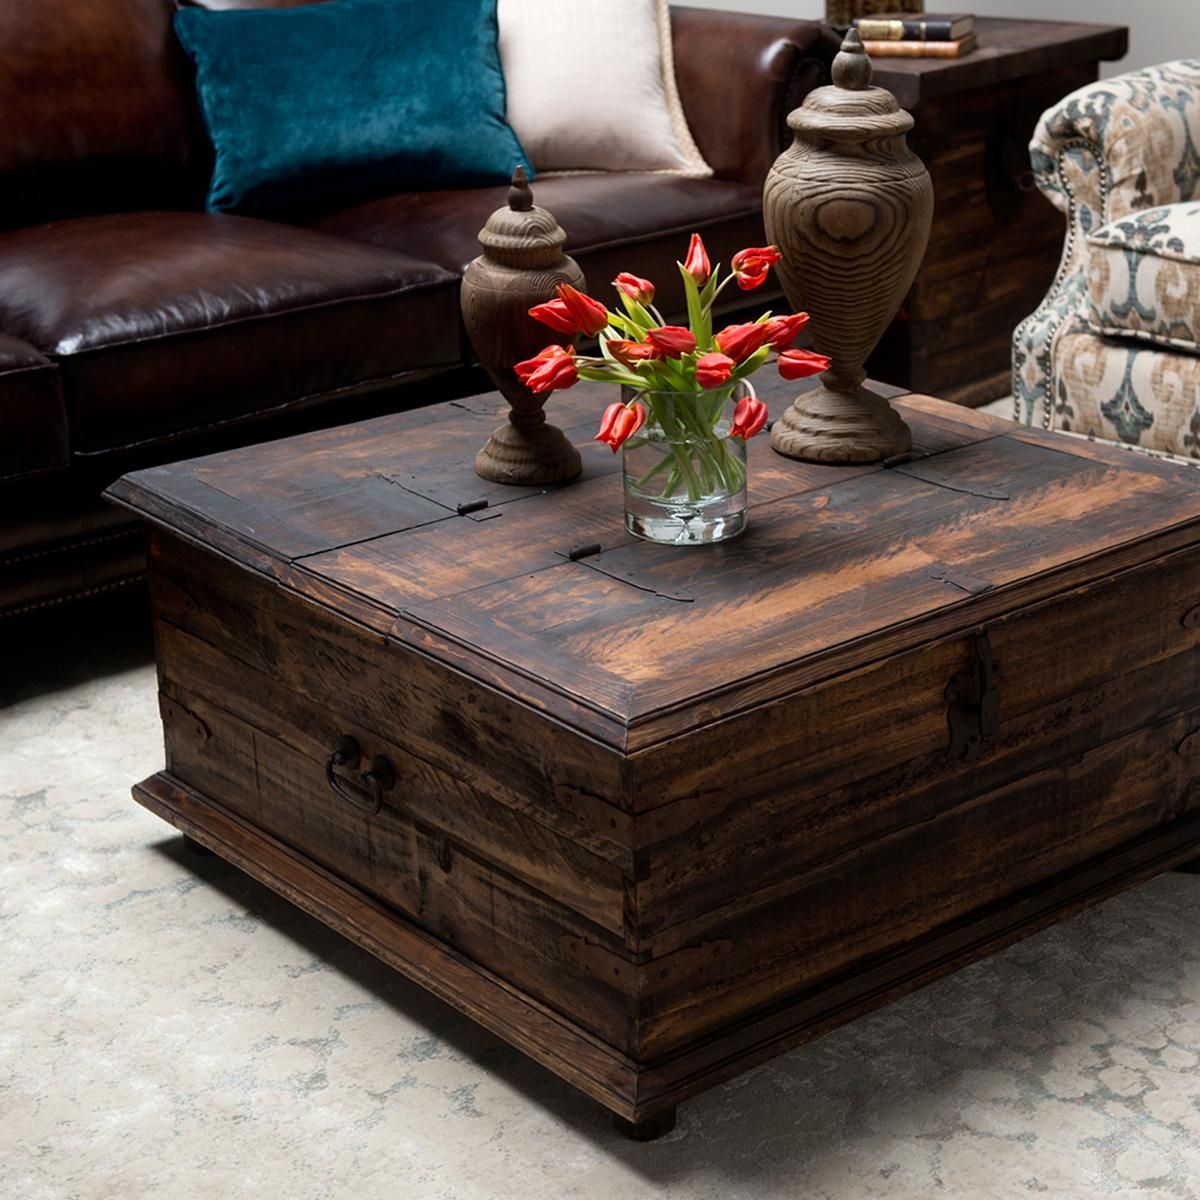 Rustic Trunk Coffee Table For Your Living Room – Homes Furniture Ideas In Rustic Wood Coffee Tables (View 10 of 15)